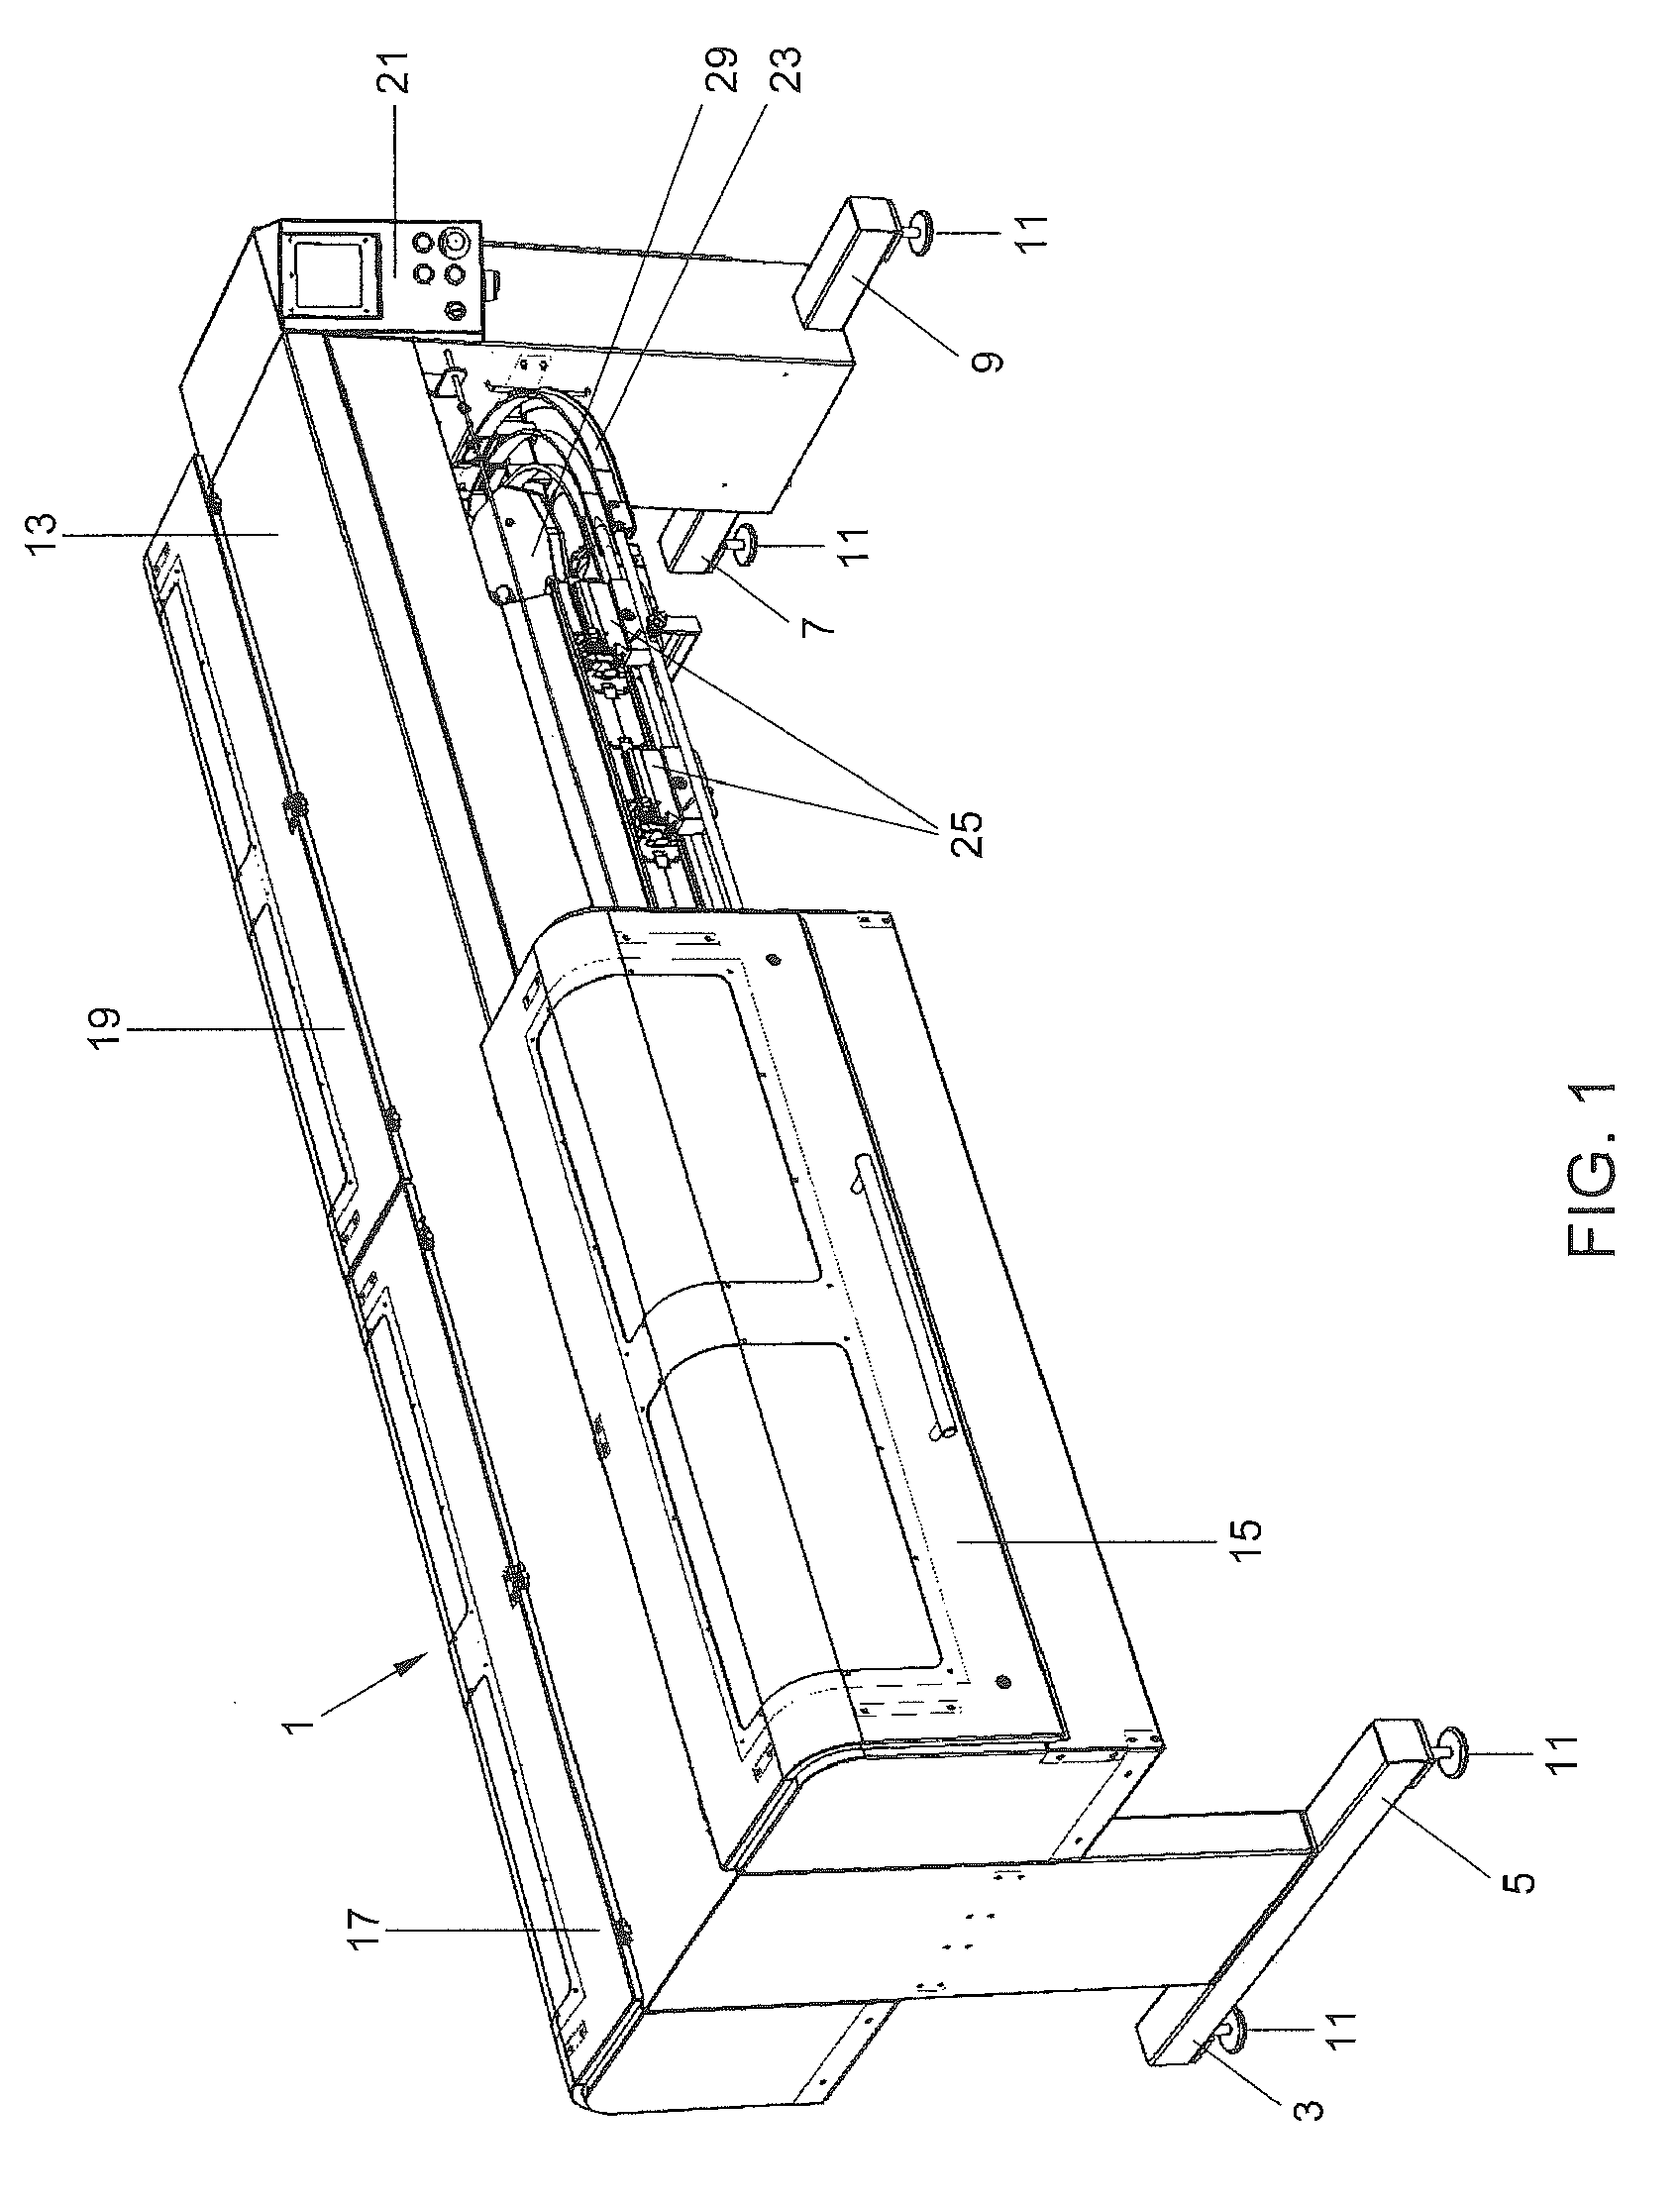 Method and system for automatically deboning poultry breast caps containing meat and a skeletal structure to obtain breast fillets therefrom